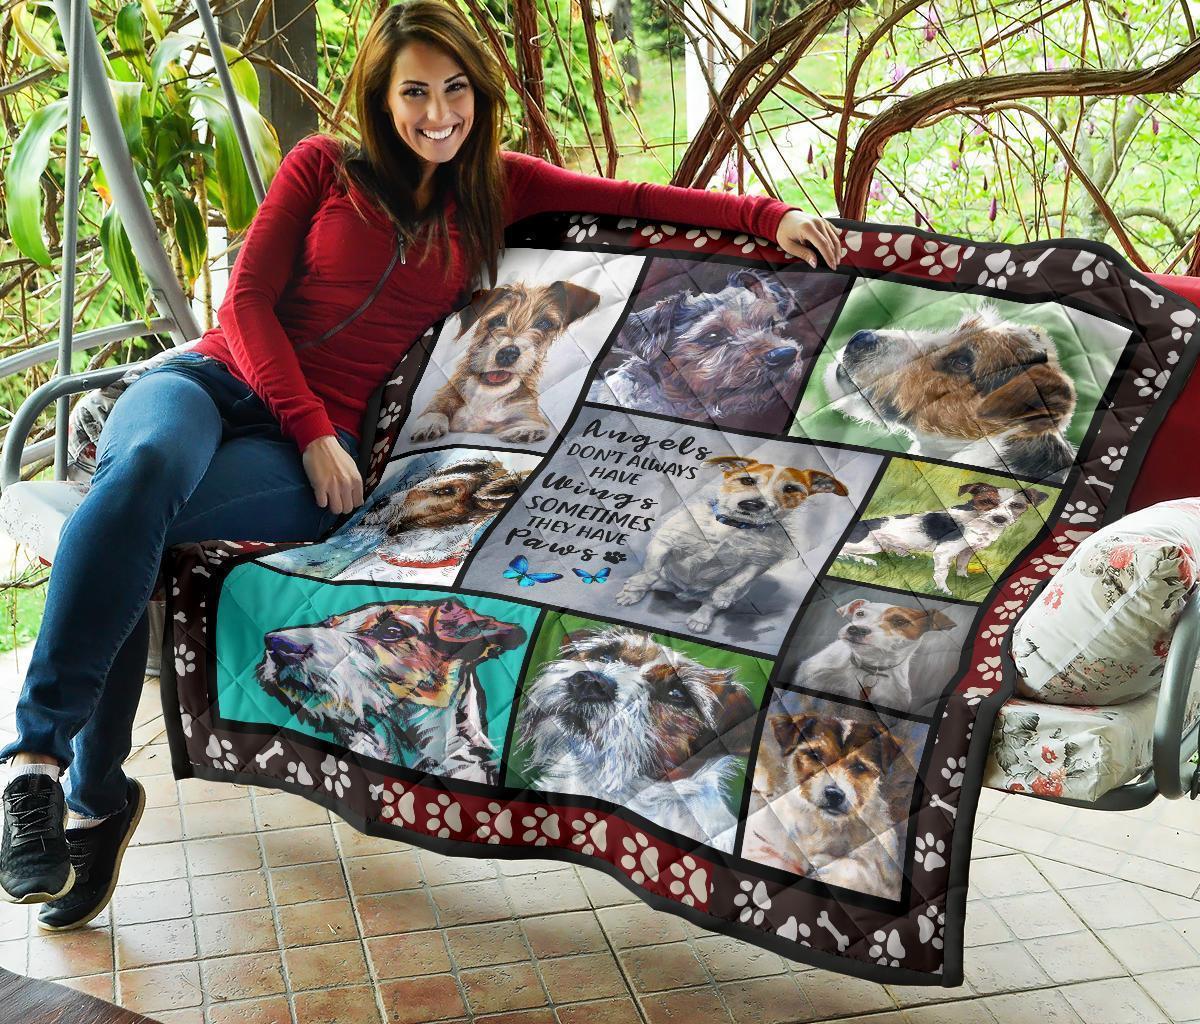 Parson Russell Dog Quilt Blanket Angels Sometimes Have Paws-Gear Wanta